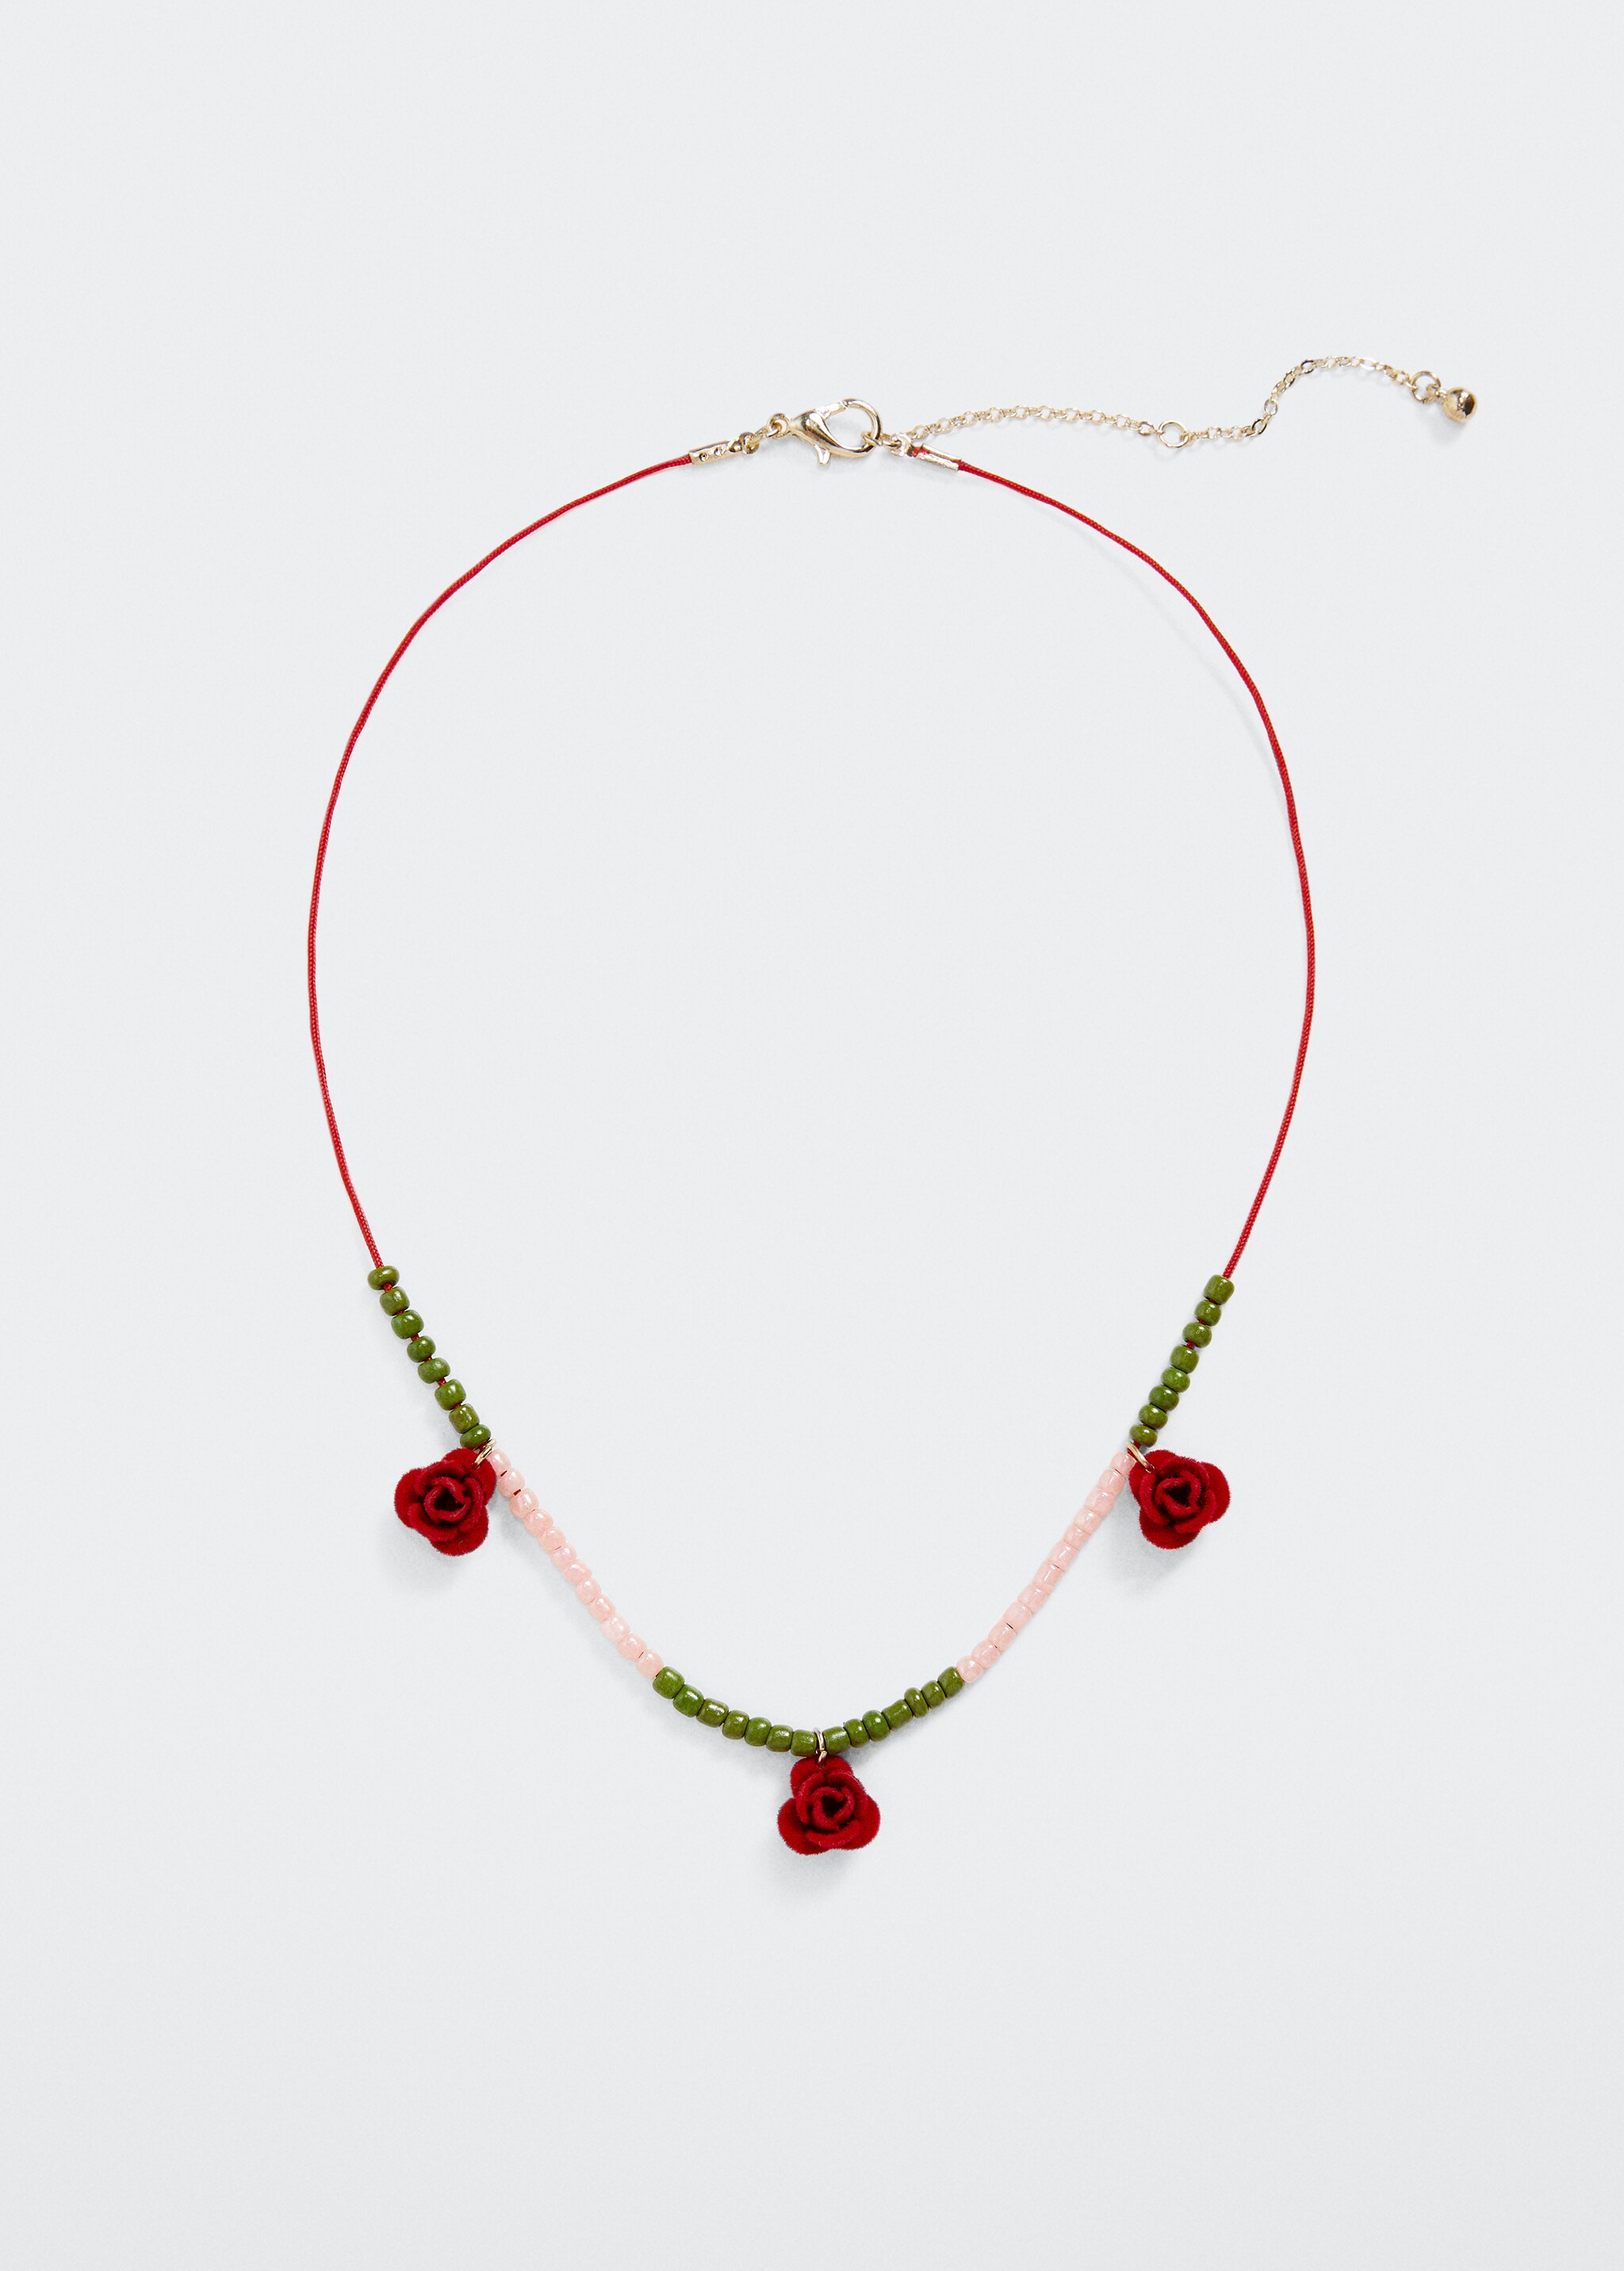 Flower beads necklace - Article without model